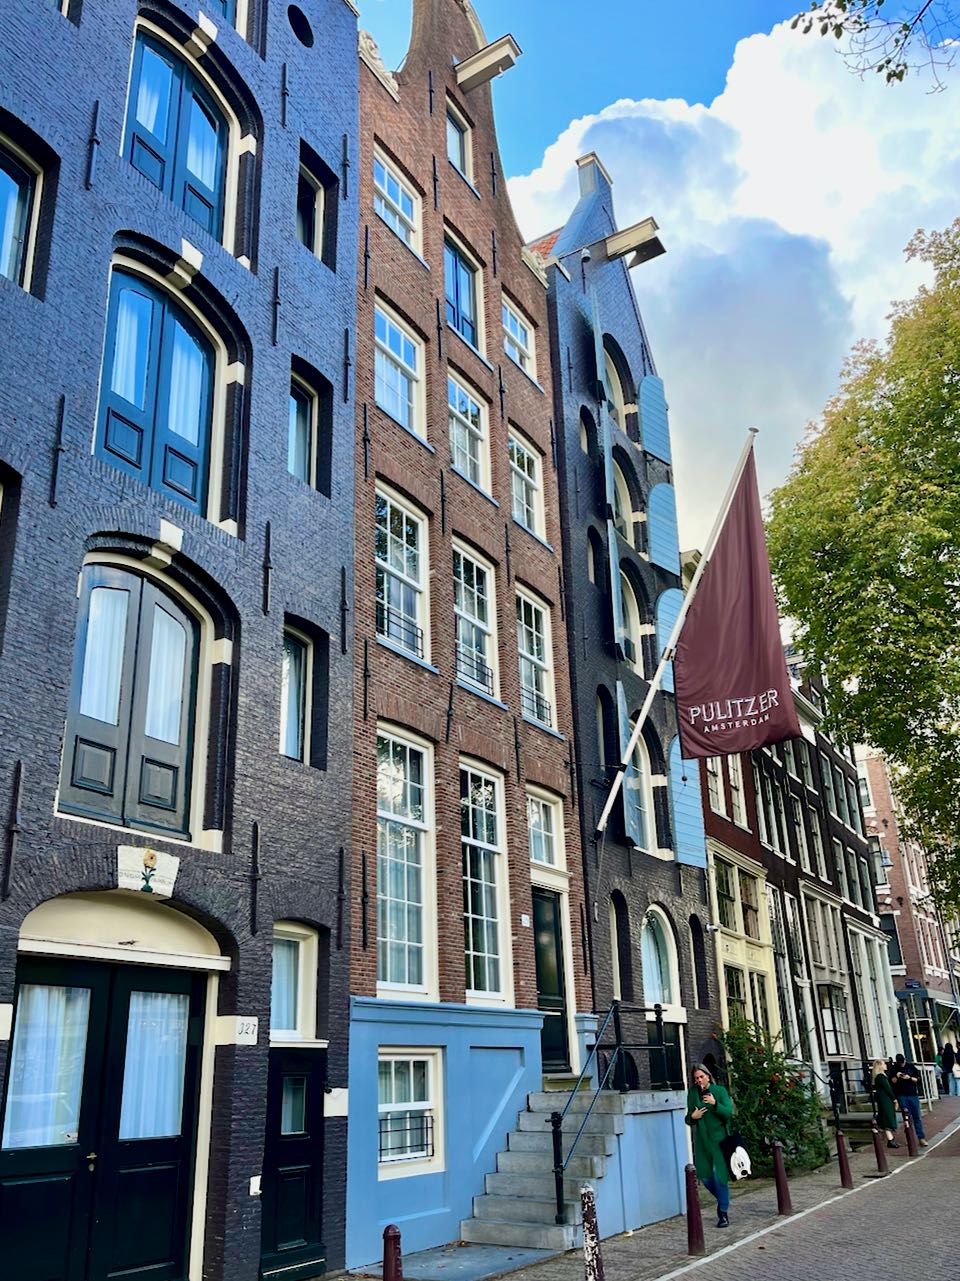 Best place to stay in Amsterdam.